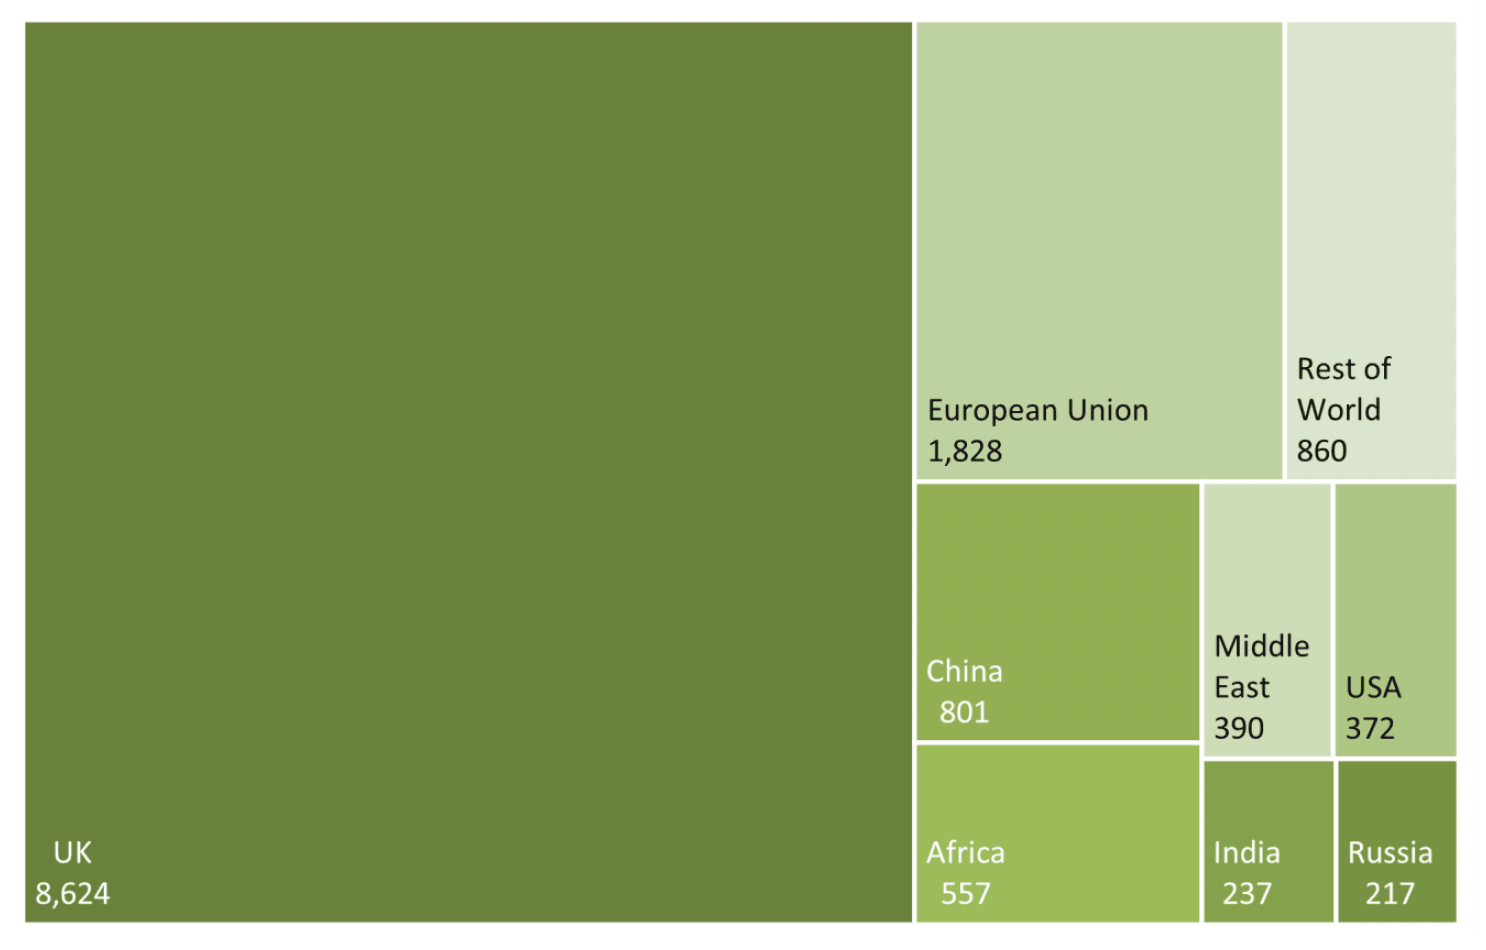 Treemap chart, showing the size of the categories in relation to each other by rectangles of proportionate size. The largest rectangle is for UK and takes up the majority of the chart. 